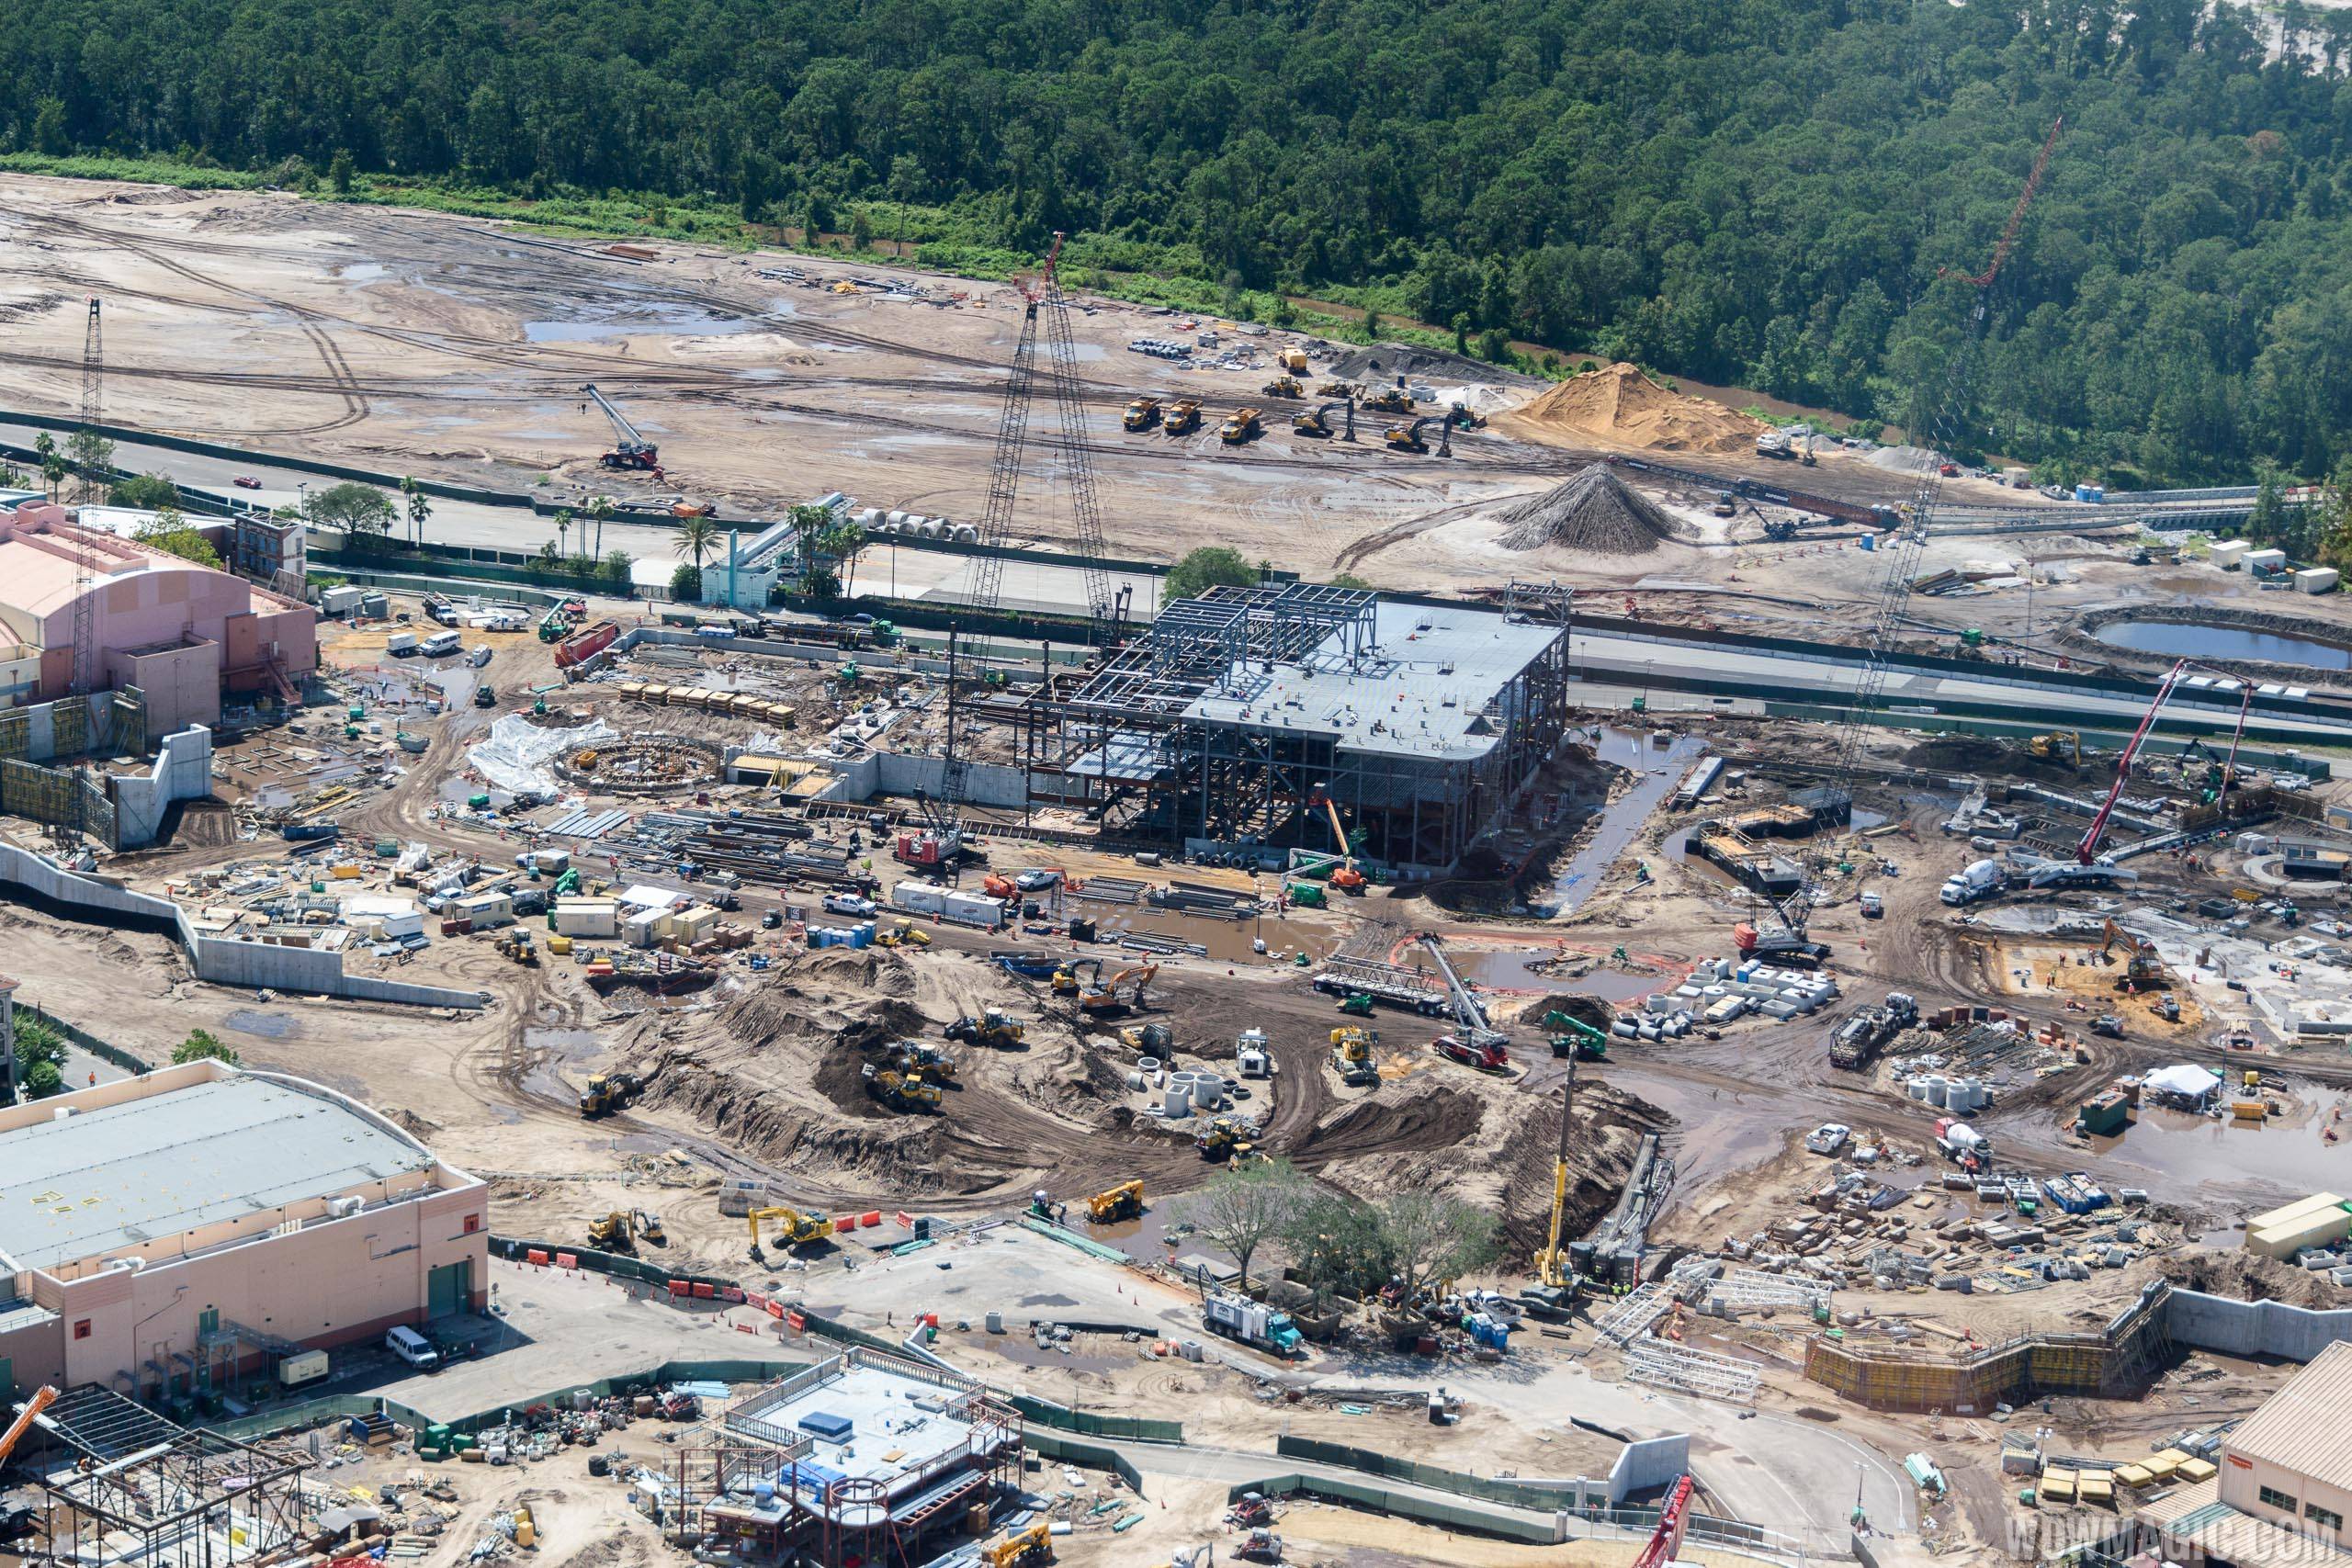 Star Wars Galaxy's Edge wide view from the air